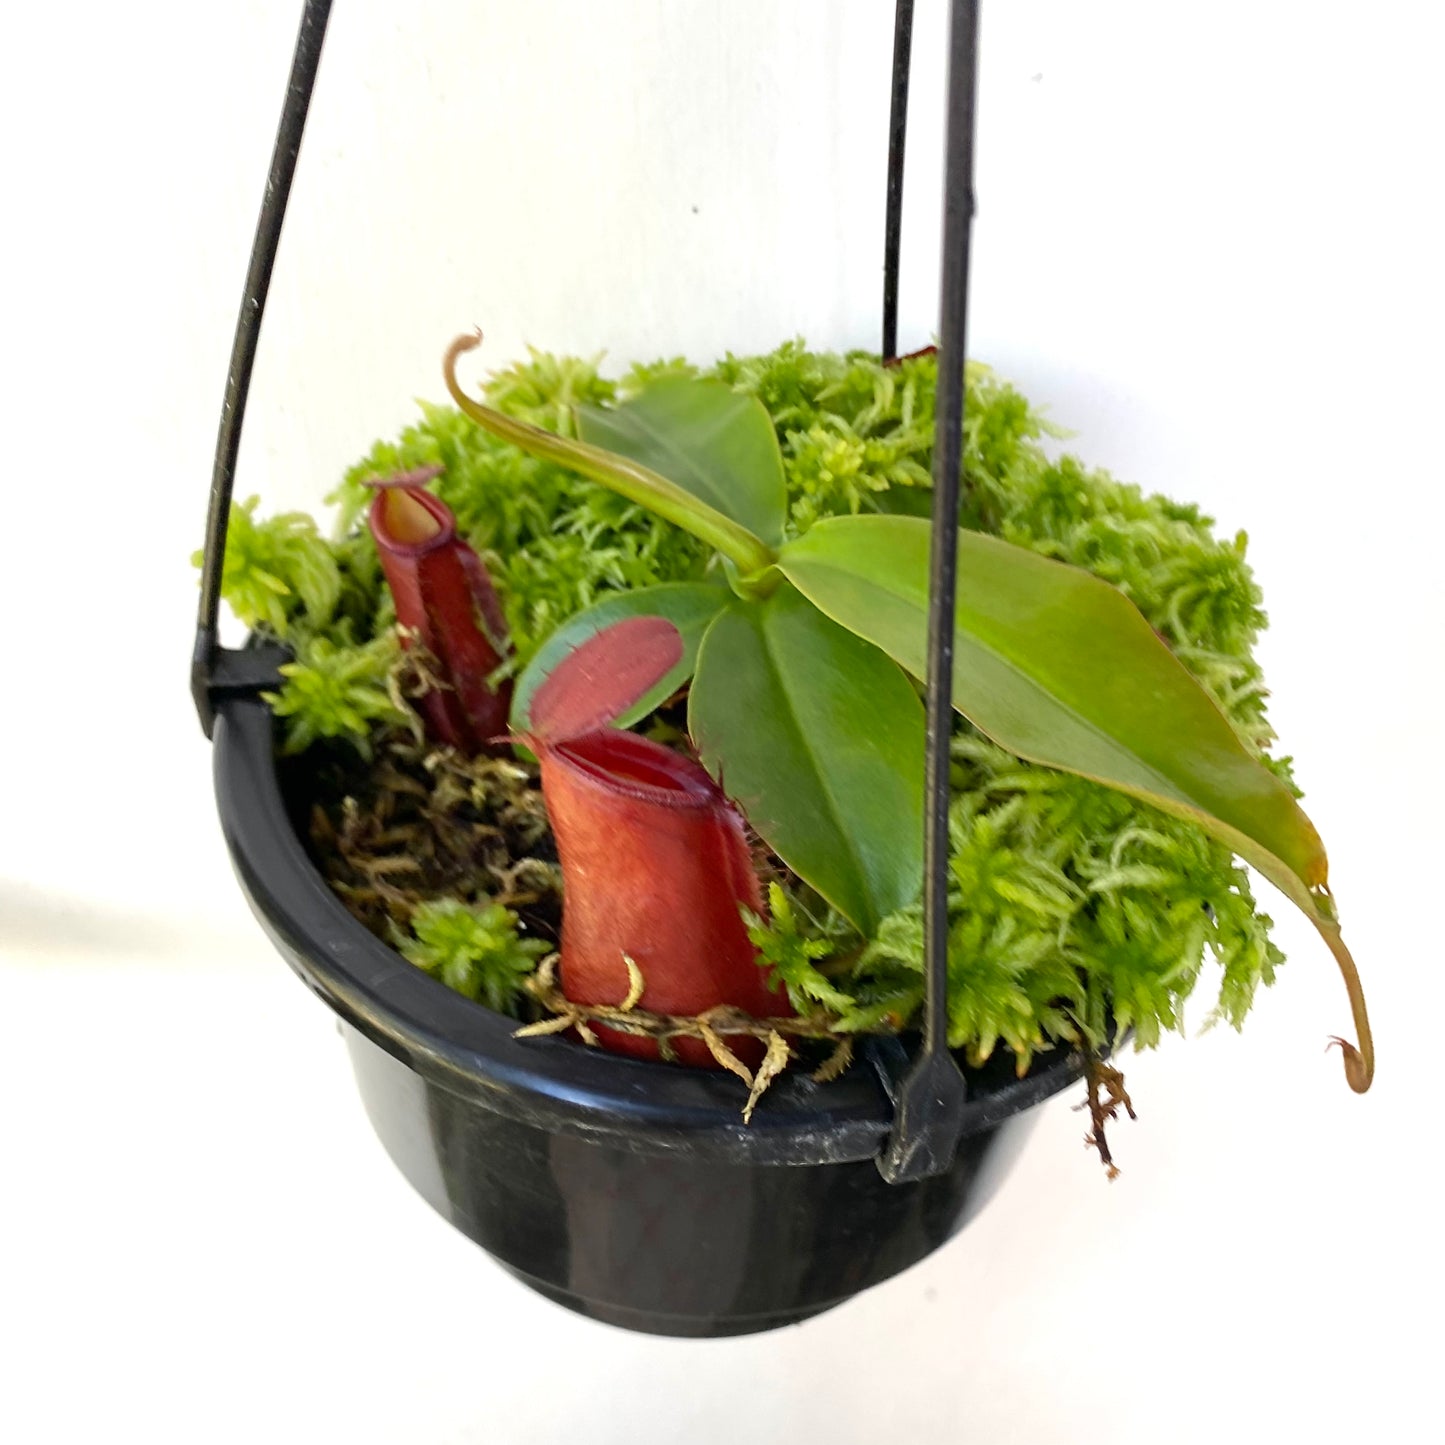 Nepenthes “Diana”